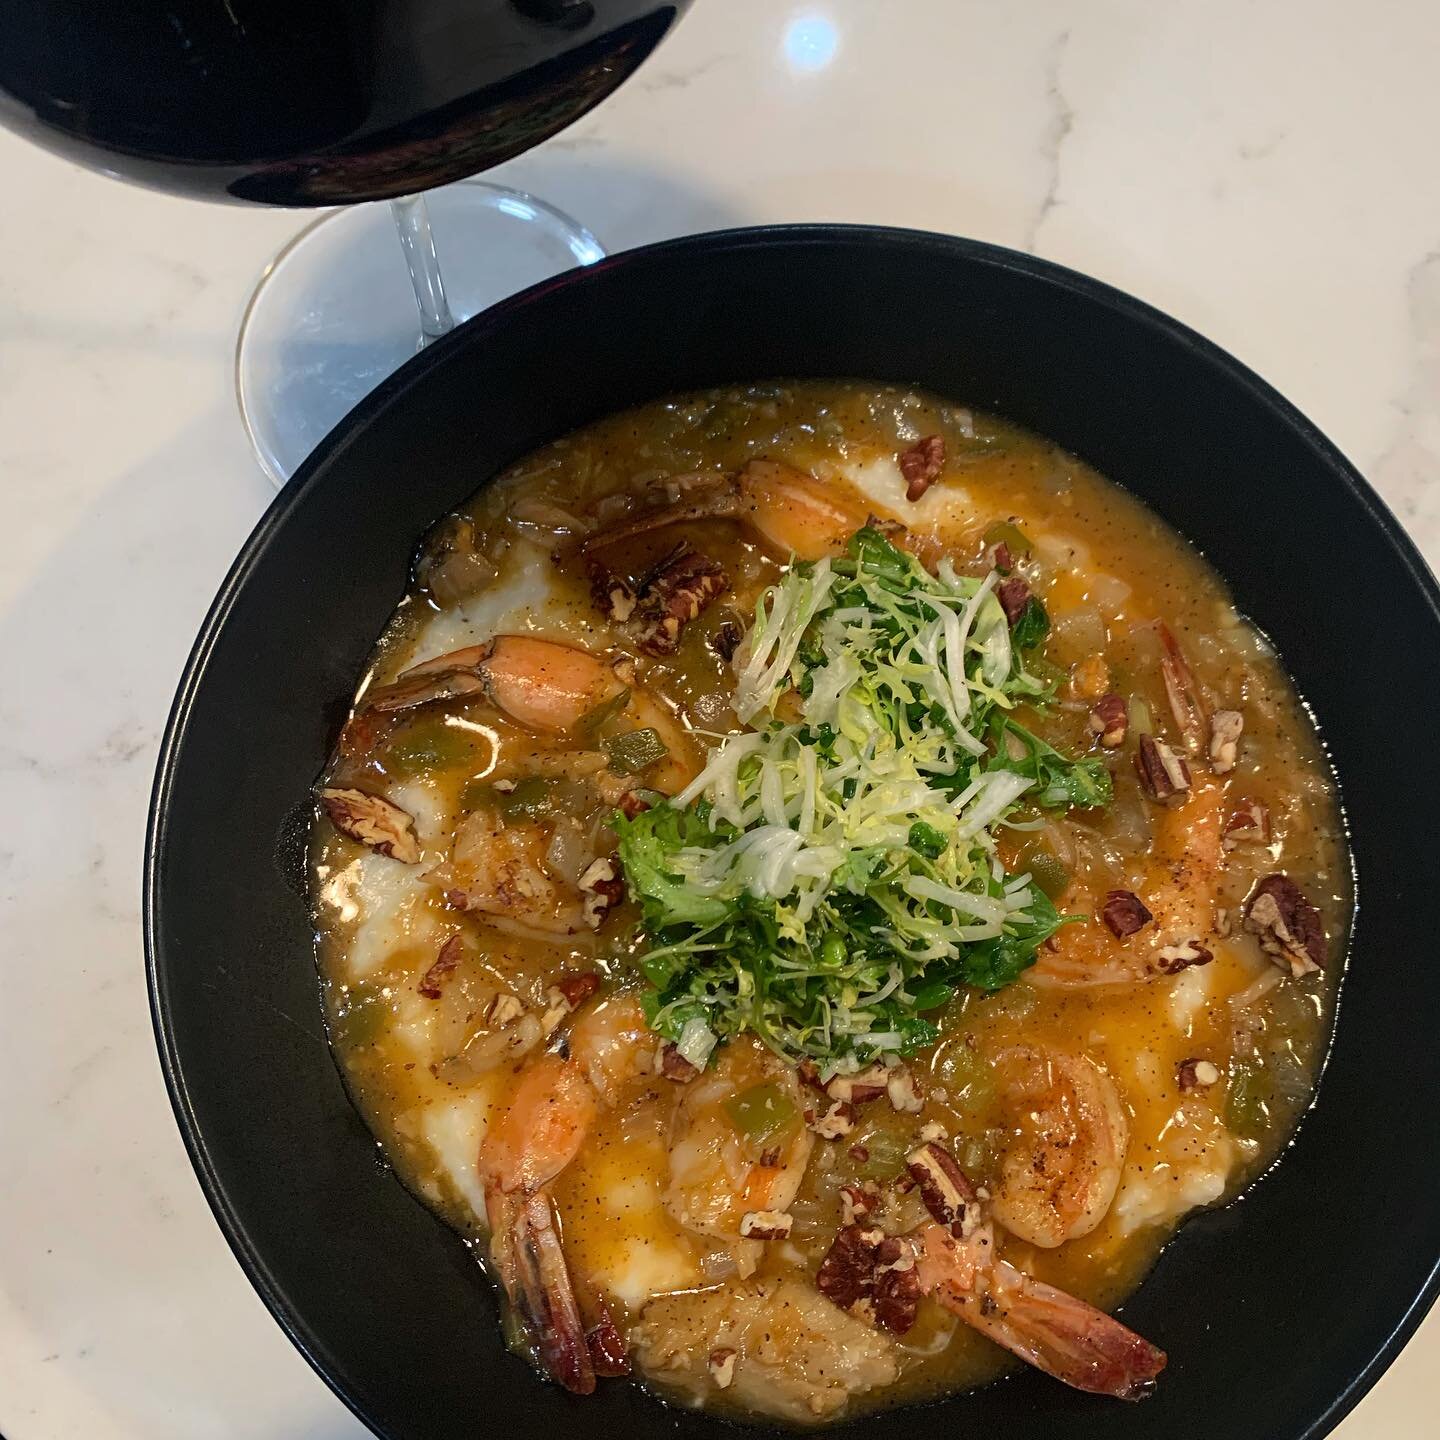 This week&rsquo;s new menu item 😍😍😍 

Wild Gulf Shrimp &amp; Grits with fiscalini cheddar grits + holy trinity + spicy shellfish gravy + herb salad + toasted pecans 

Pairing perfectly with our 2020 Primus Carm&eacute;n&egrave;re 🍷🍷🍷 this wine 